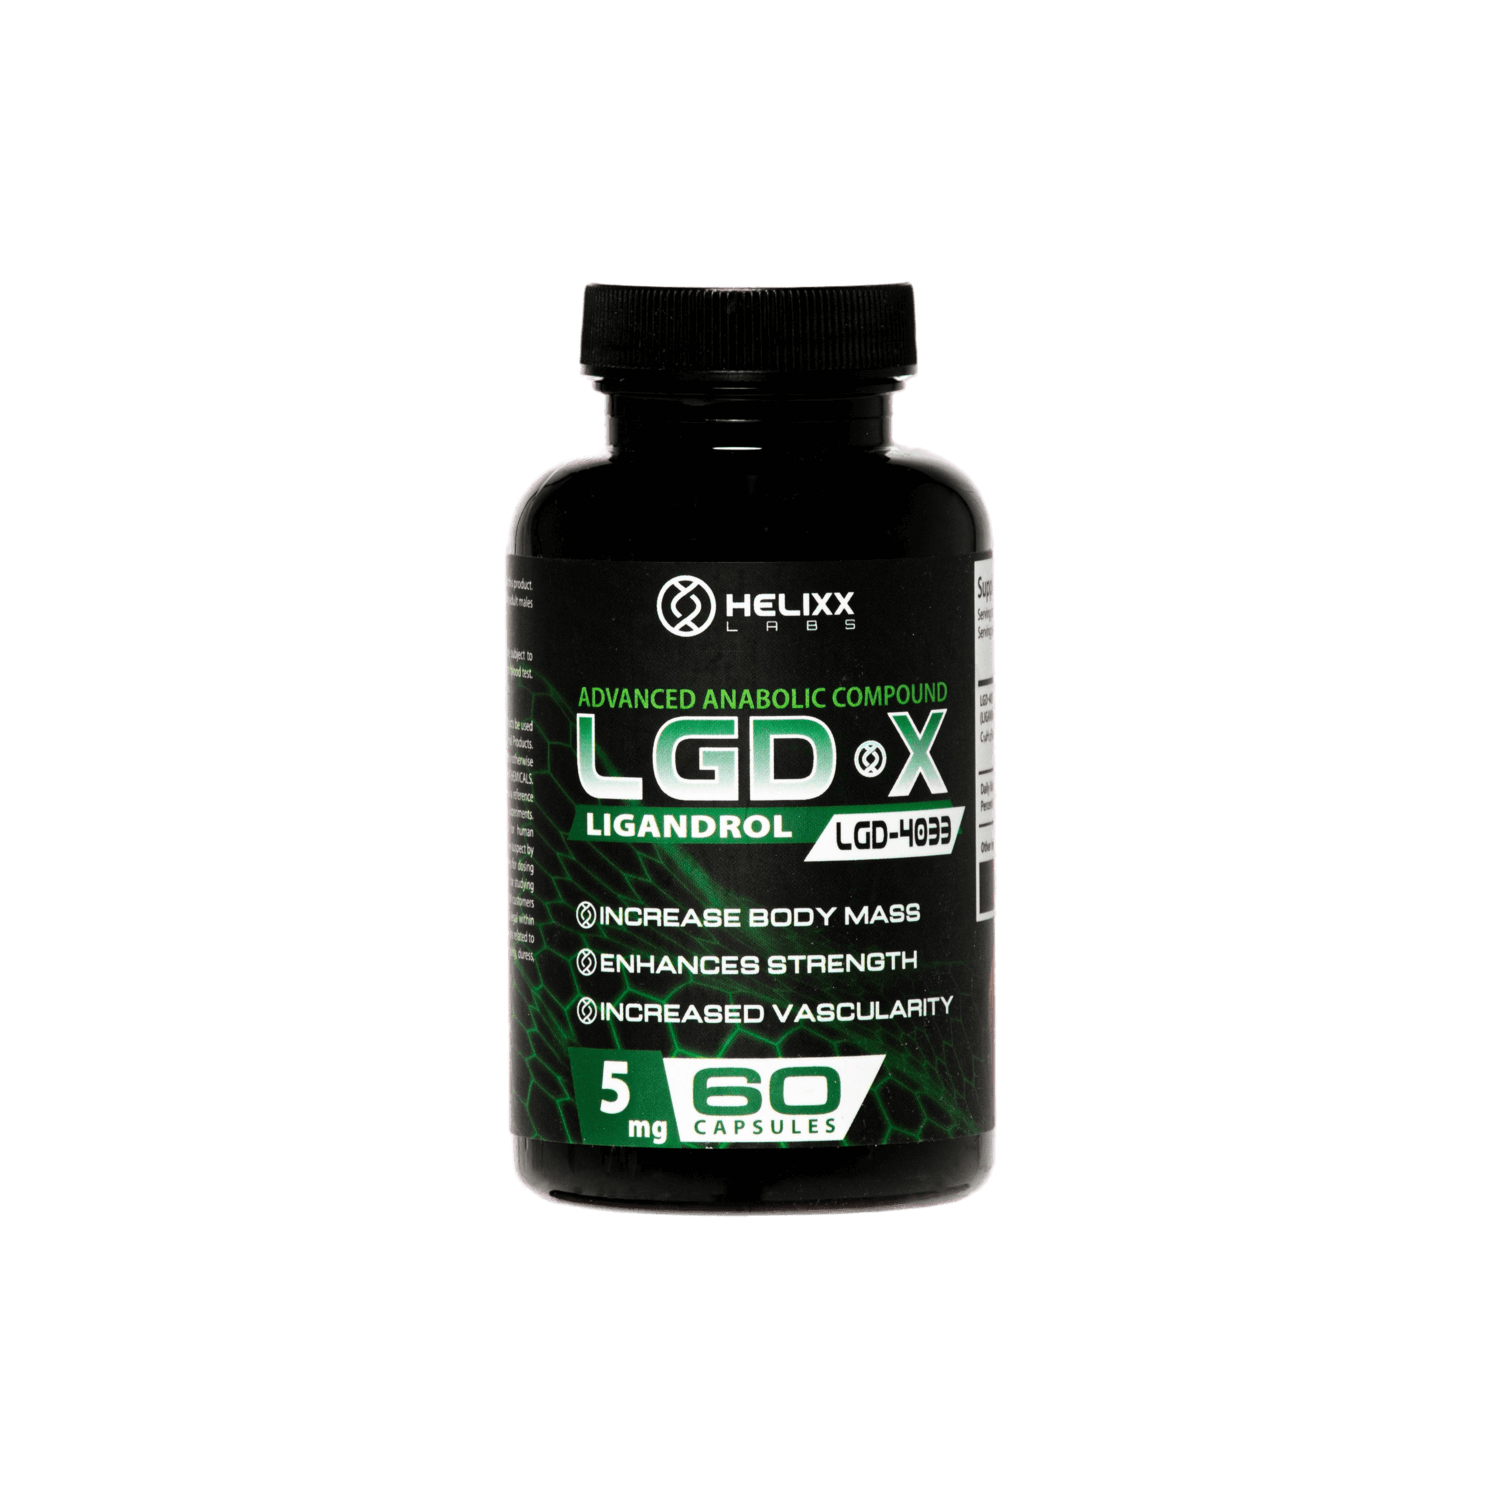 Ligandrol LGD 4033 SARM - 60 Capsules of 5mg for Improved Endurance, Bone Density and Muscle Growth